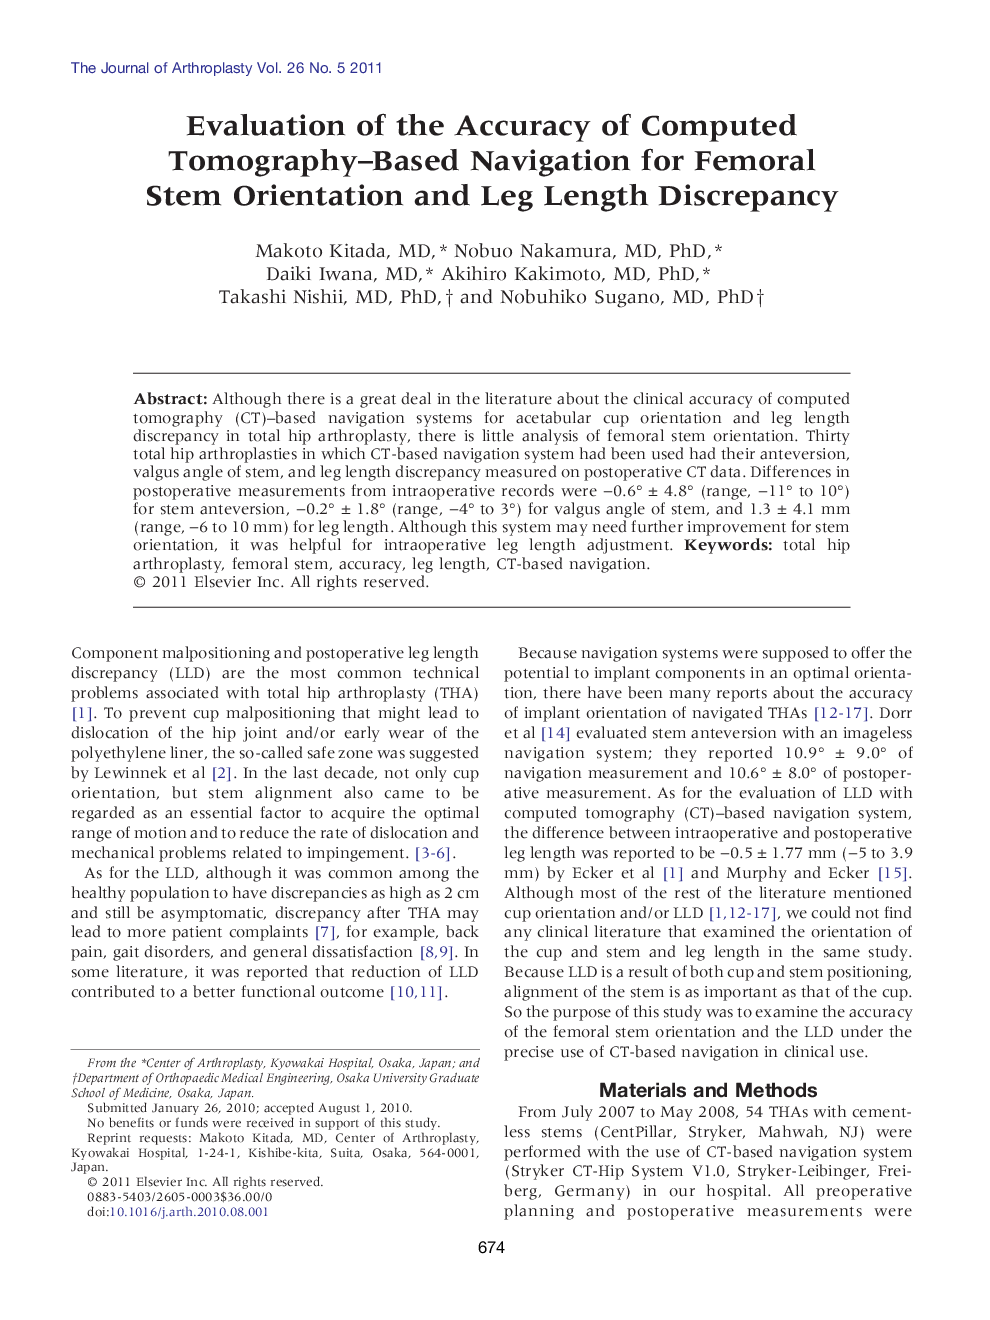 Evaluation of the Accuracy of Computed Tomography–Based Navigation for Femoral Stem Orientation and Leg Length Discrepancy 